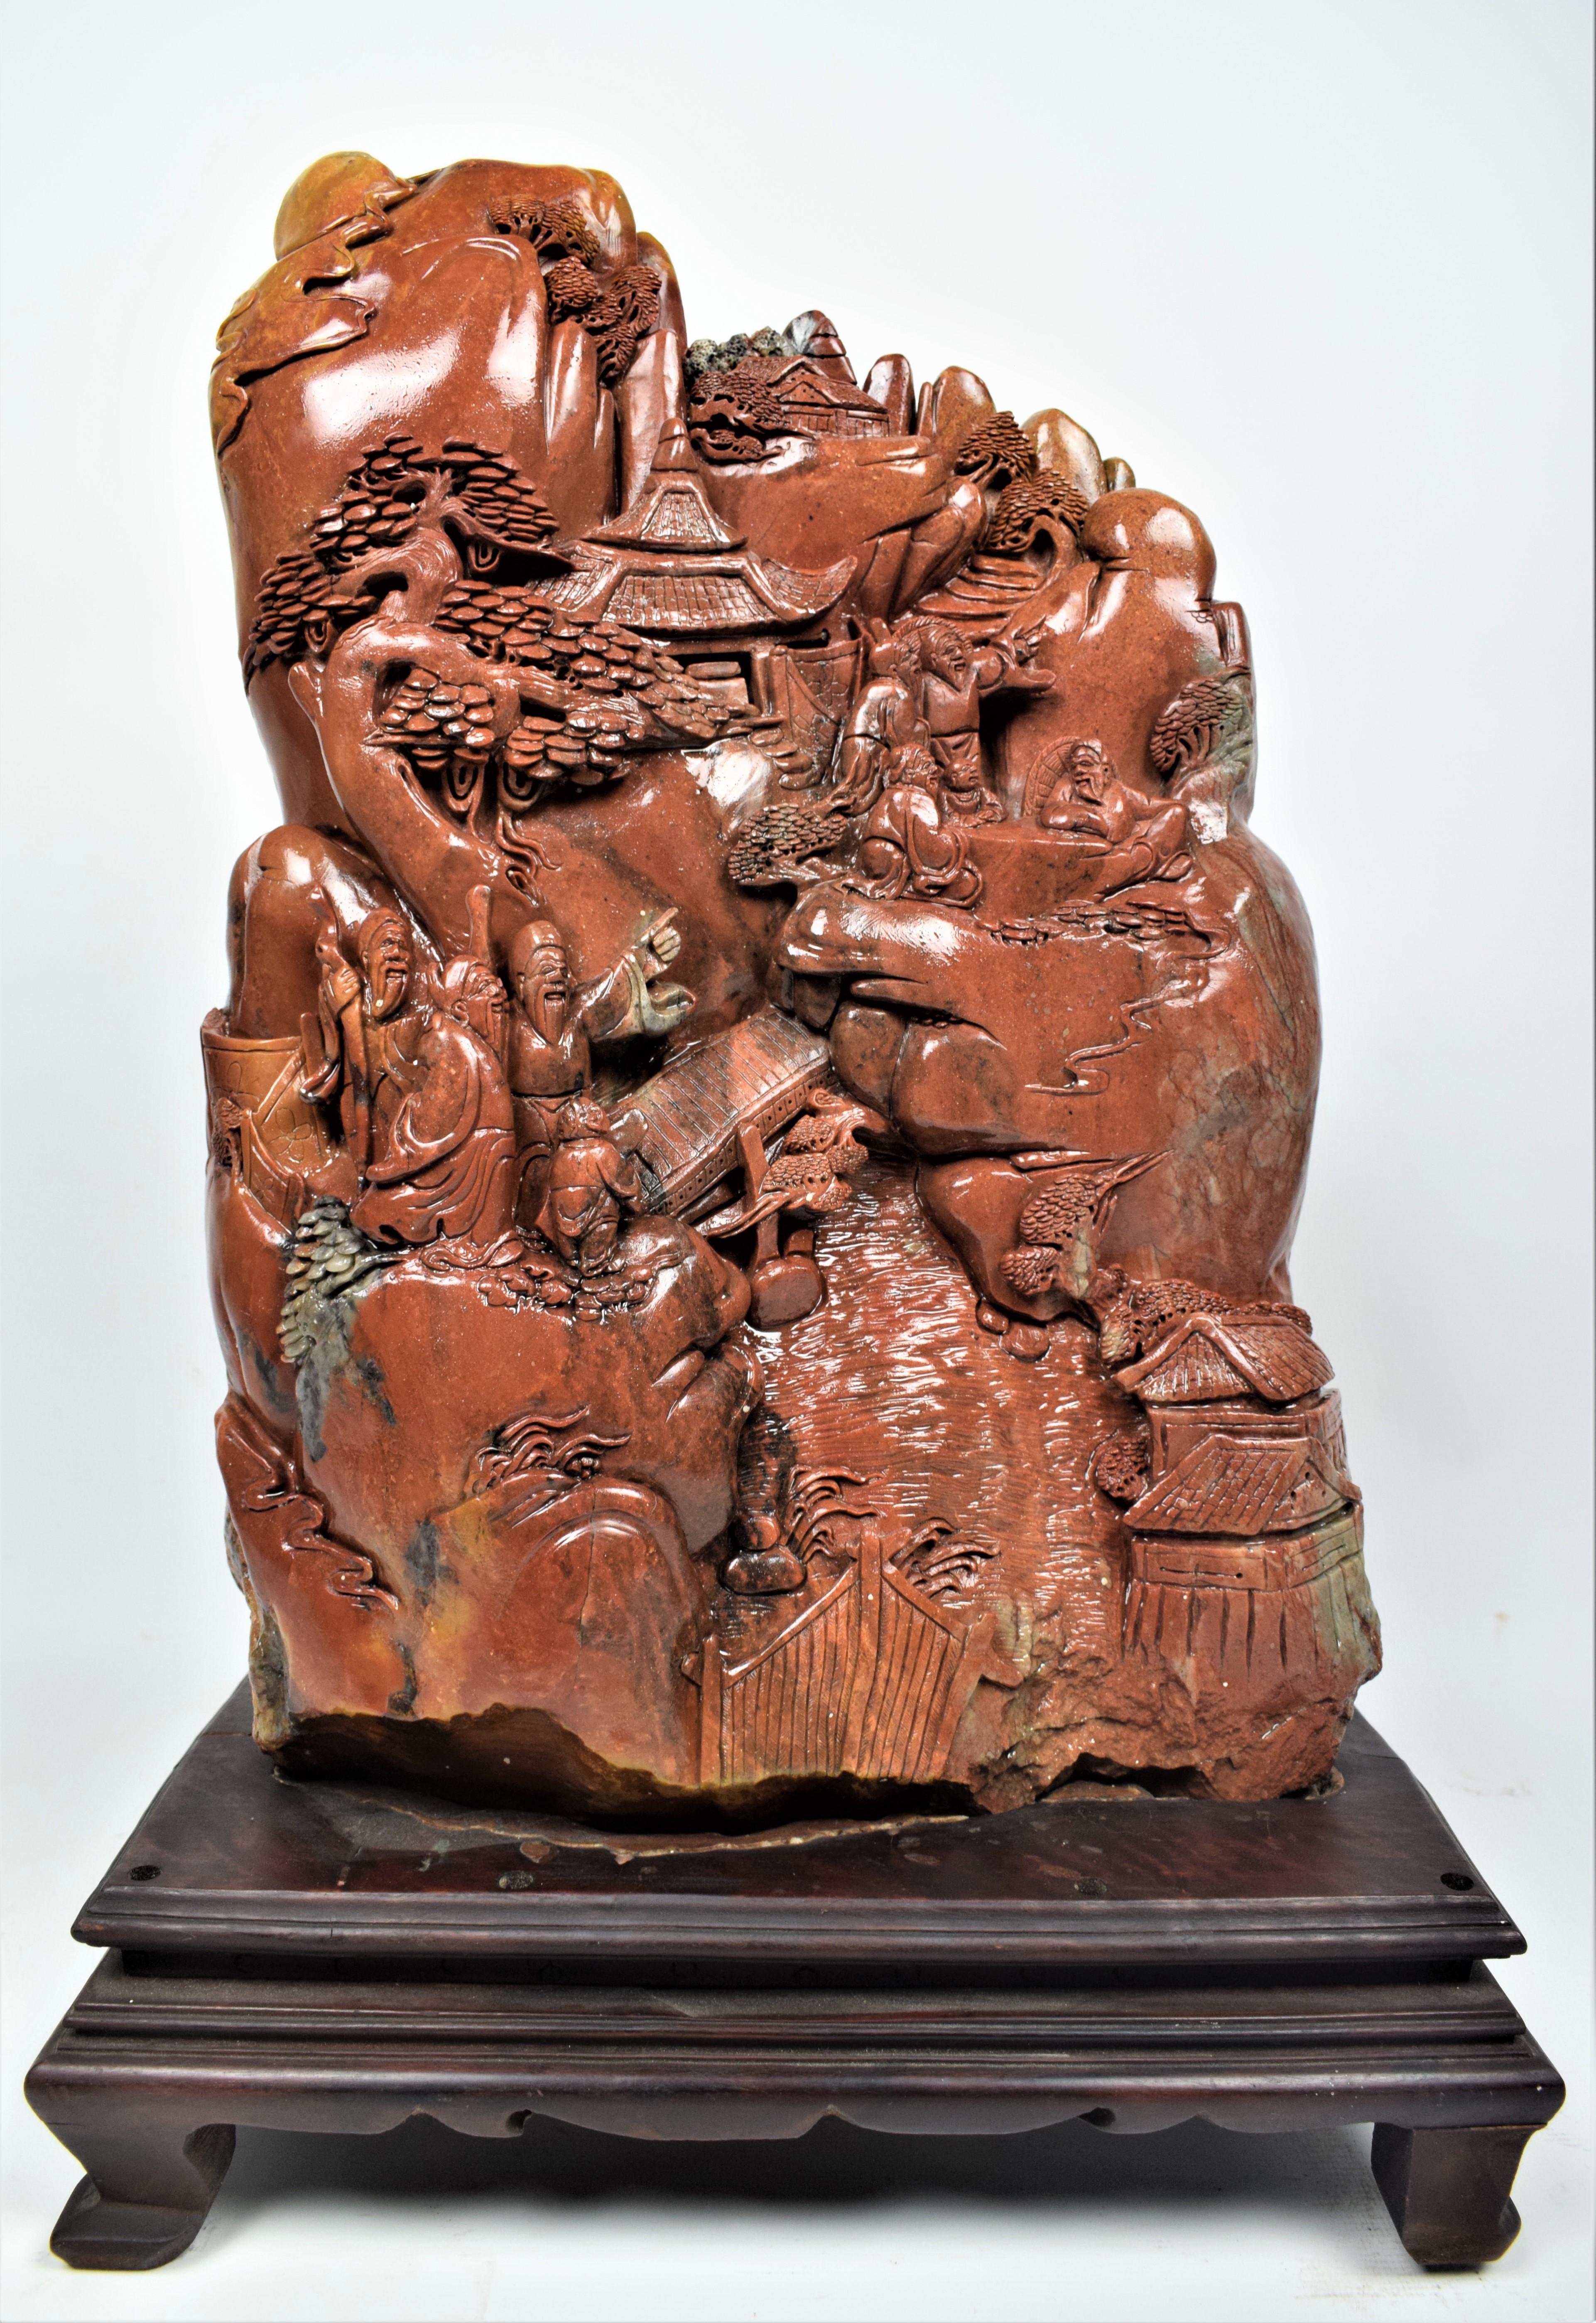 The Chinese soapstone carving from the mid-20th century is depicting a village scene, is a stunning piece of art with intricate details and cultural significance. The carving showcases a traditional Chinese village with elements that reflect life